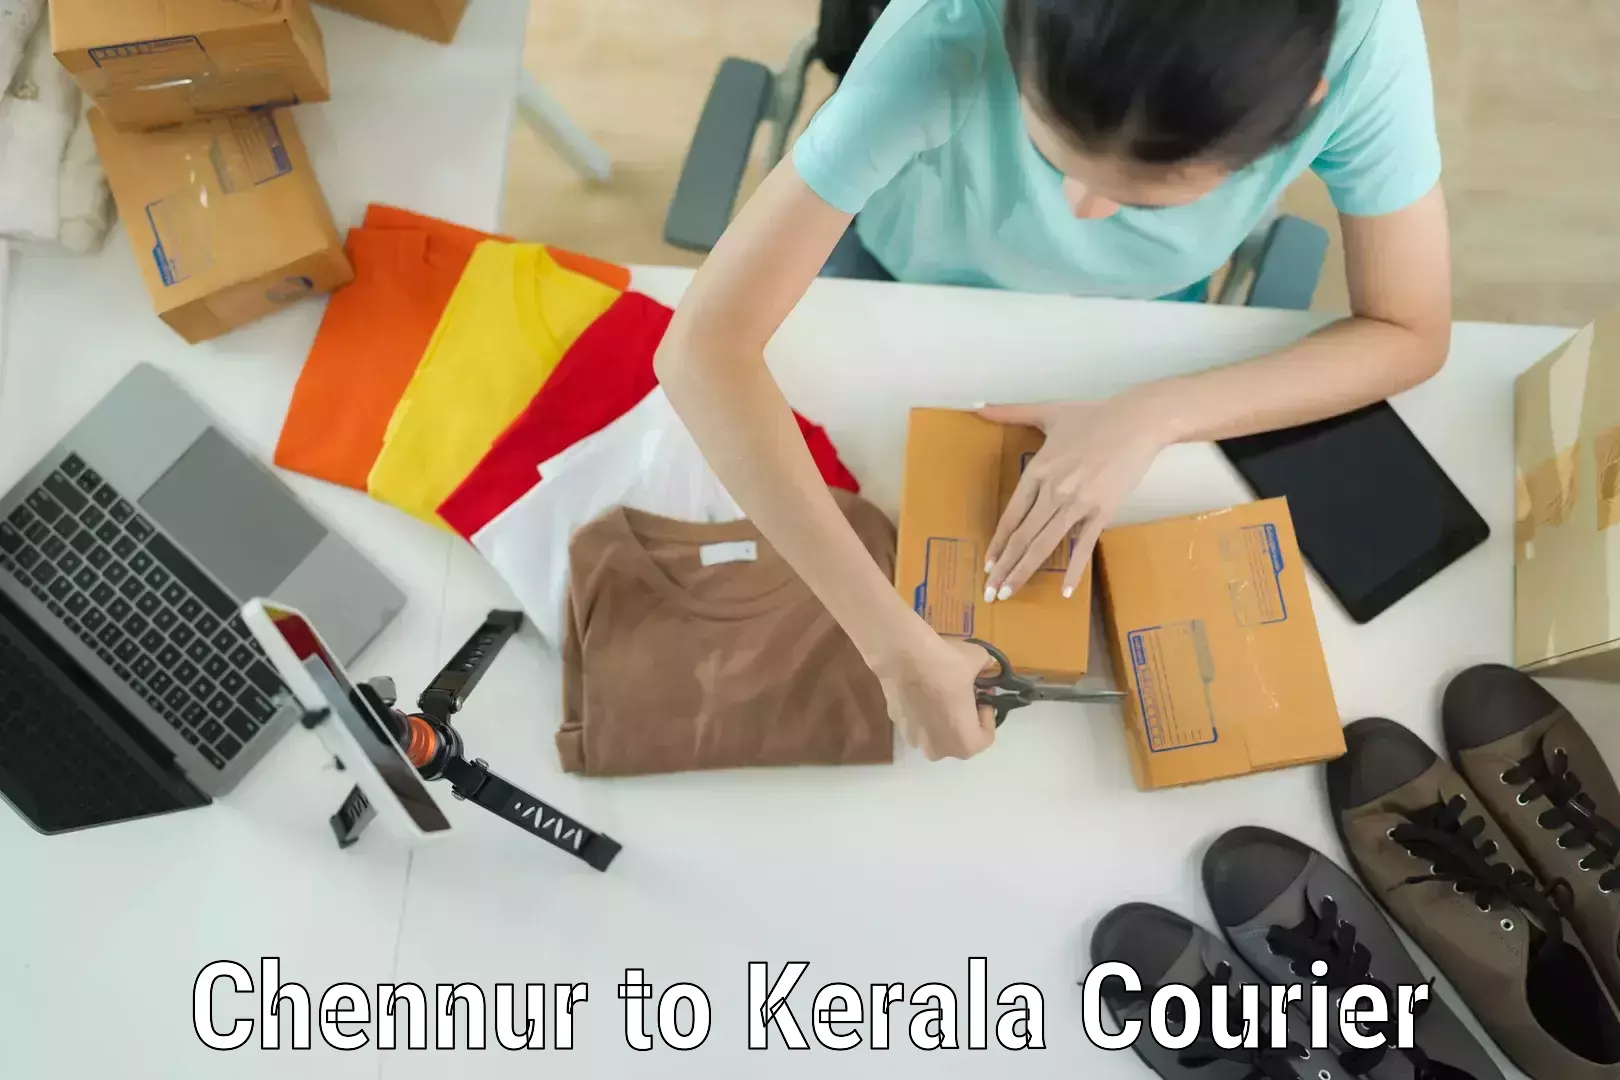 Luggage transport guidelines Chennur to Cochin University of Science and Technology